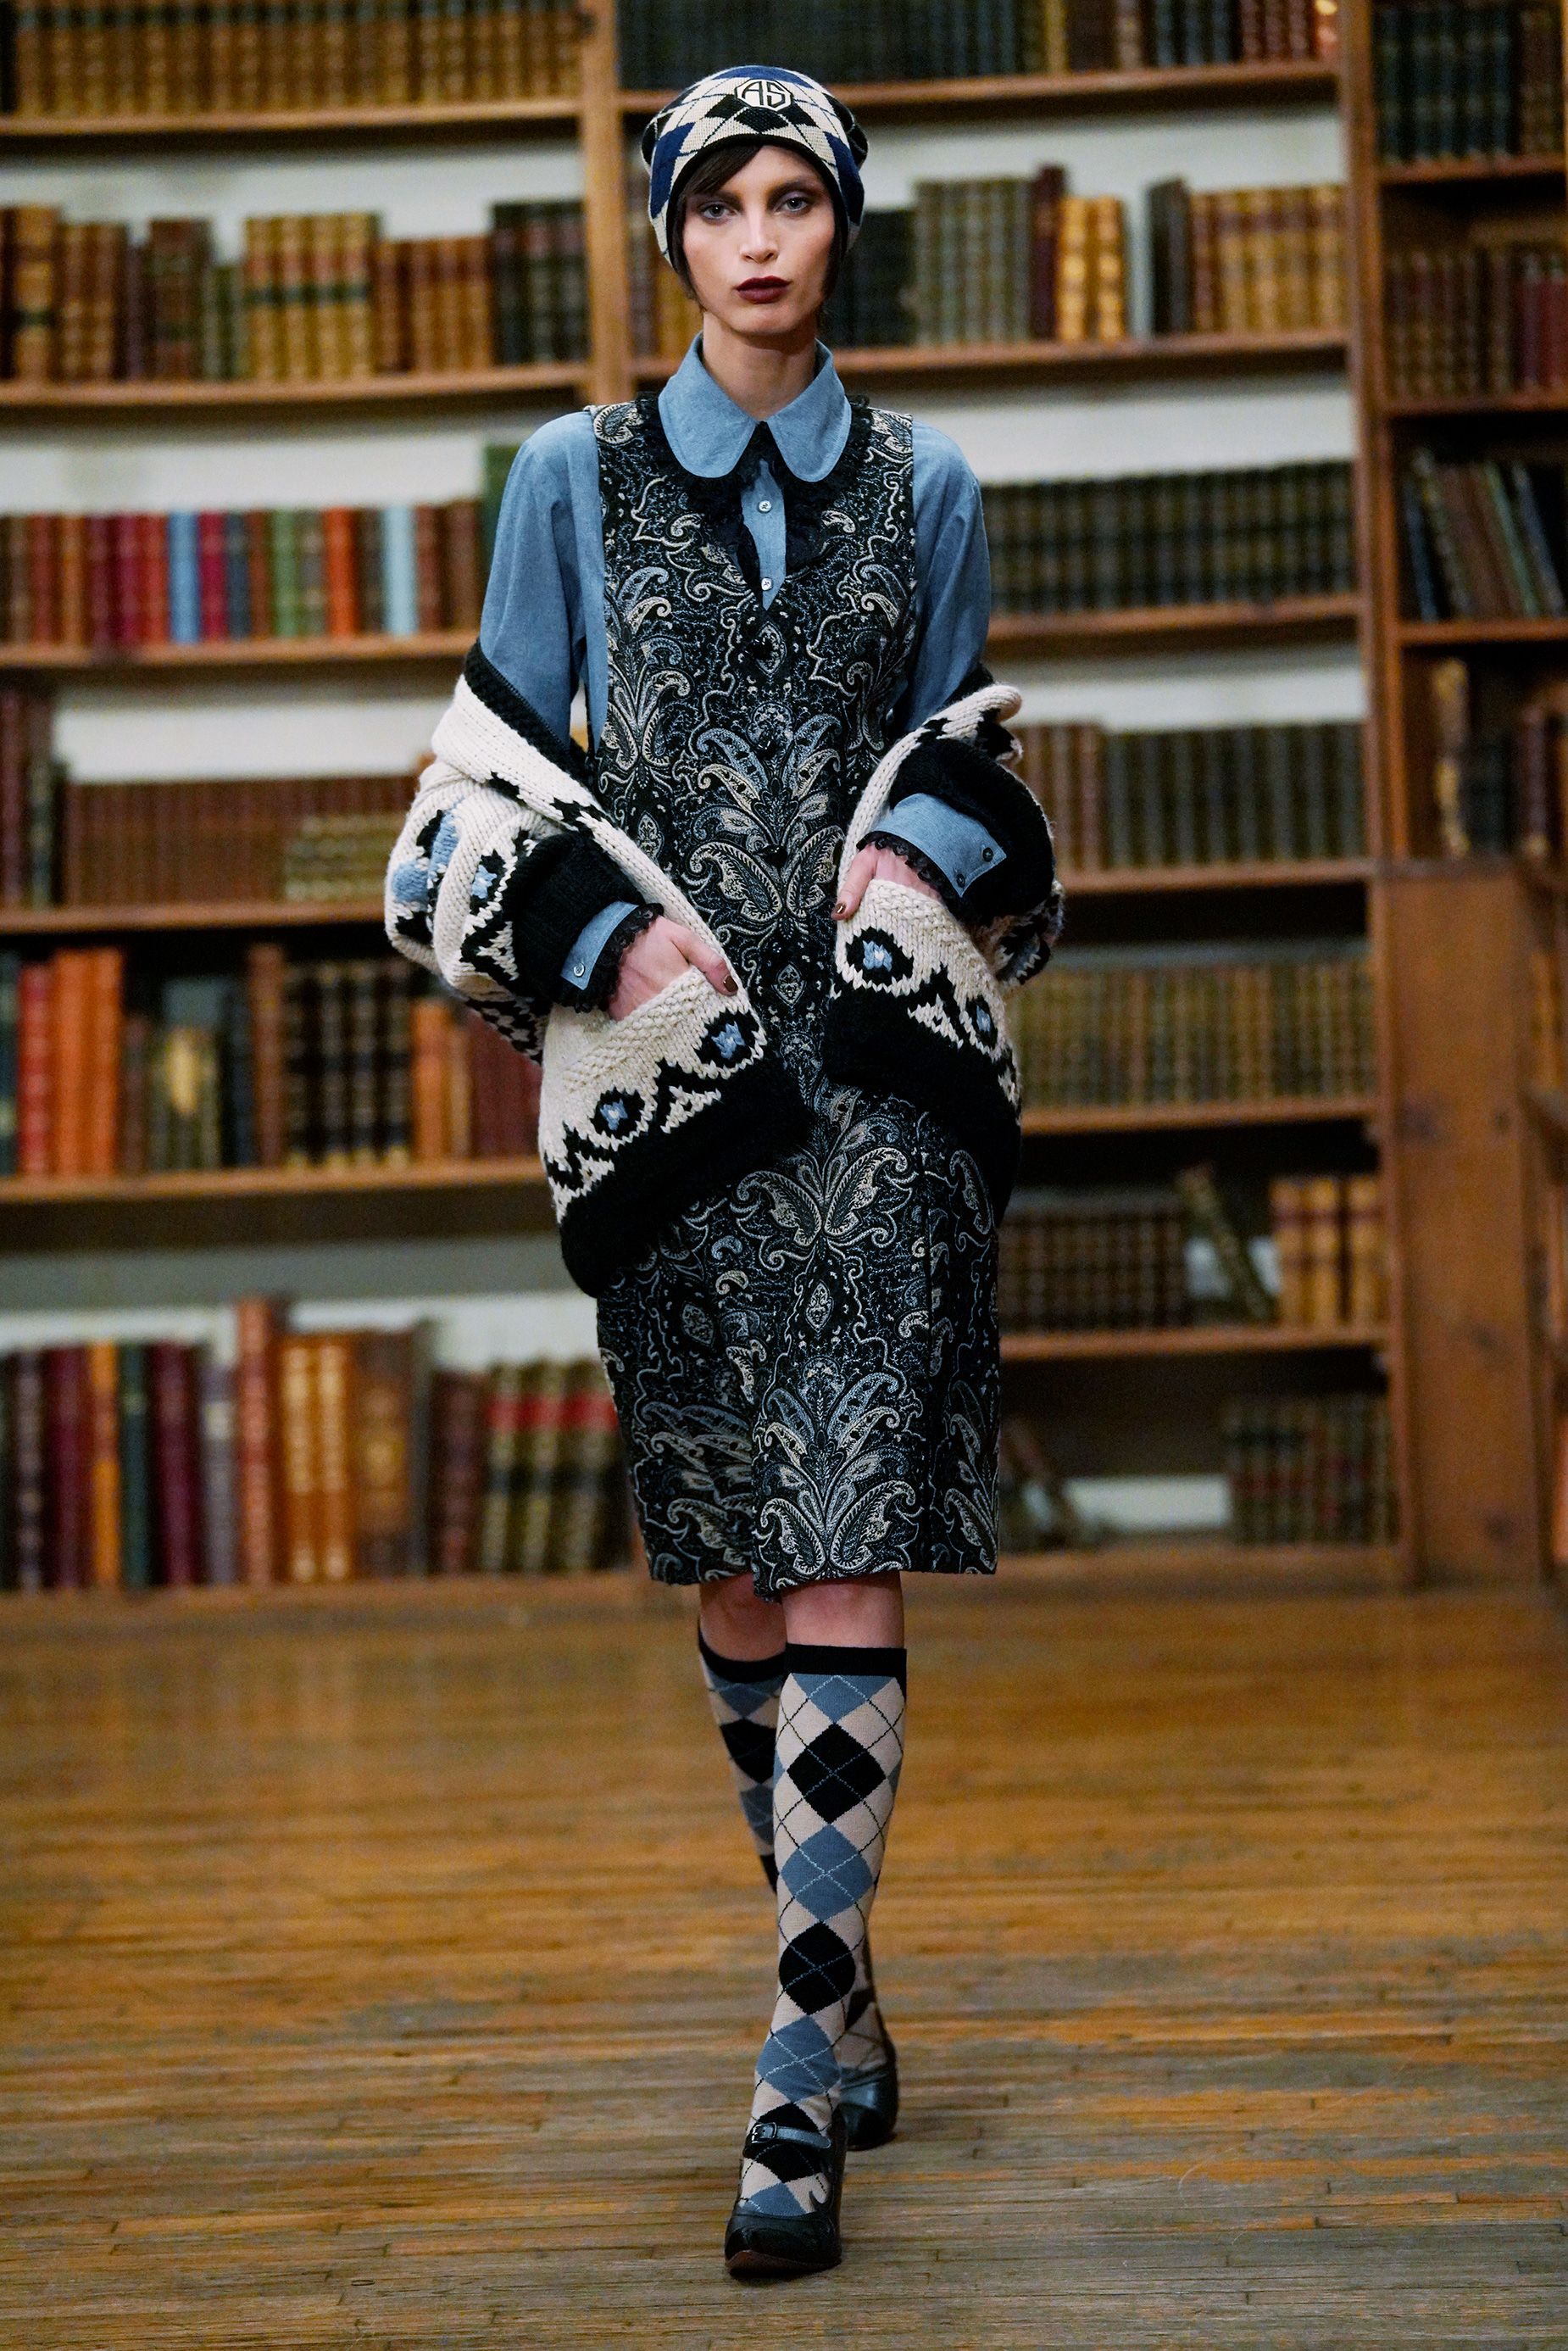 Anna Sui presented her collection in New York City's famed Strand Book Store, with a runway amid the stacks.